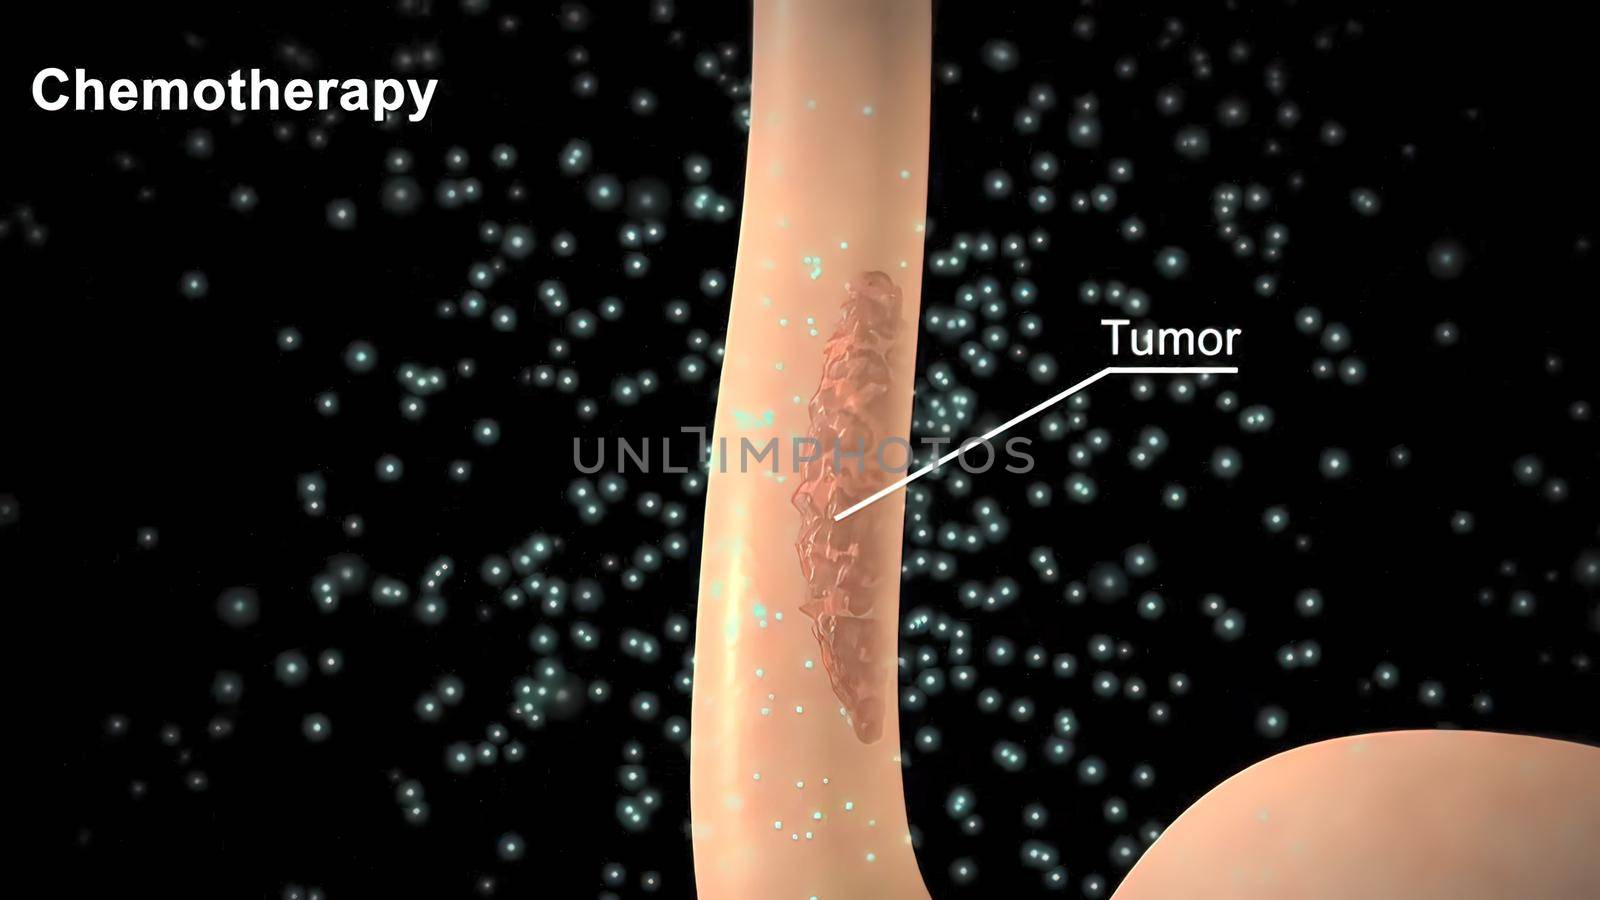 Chemotherapy is applied to the tumor areas and the tumor is cleared. by creativepic